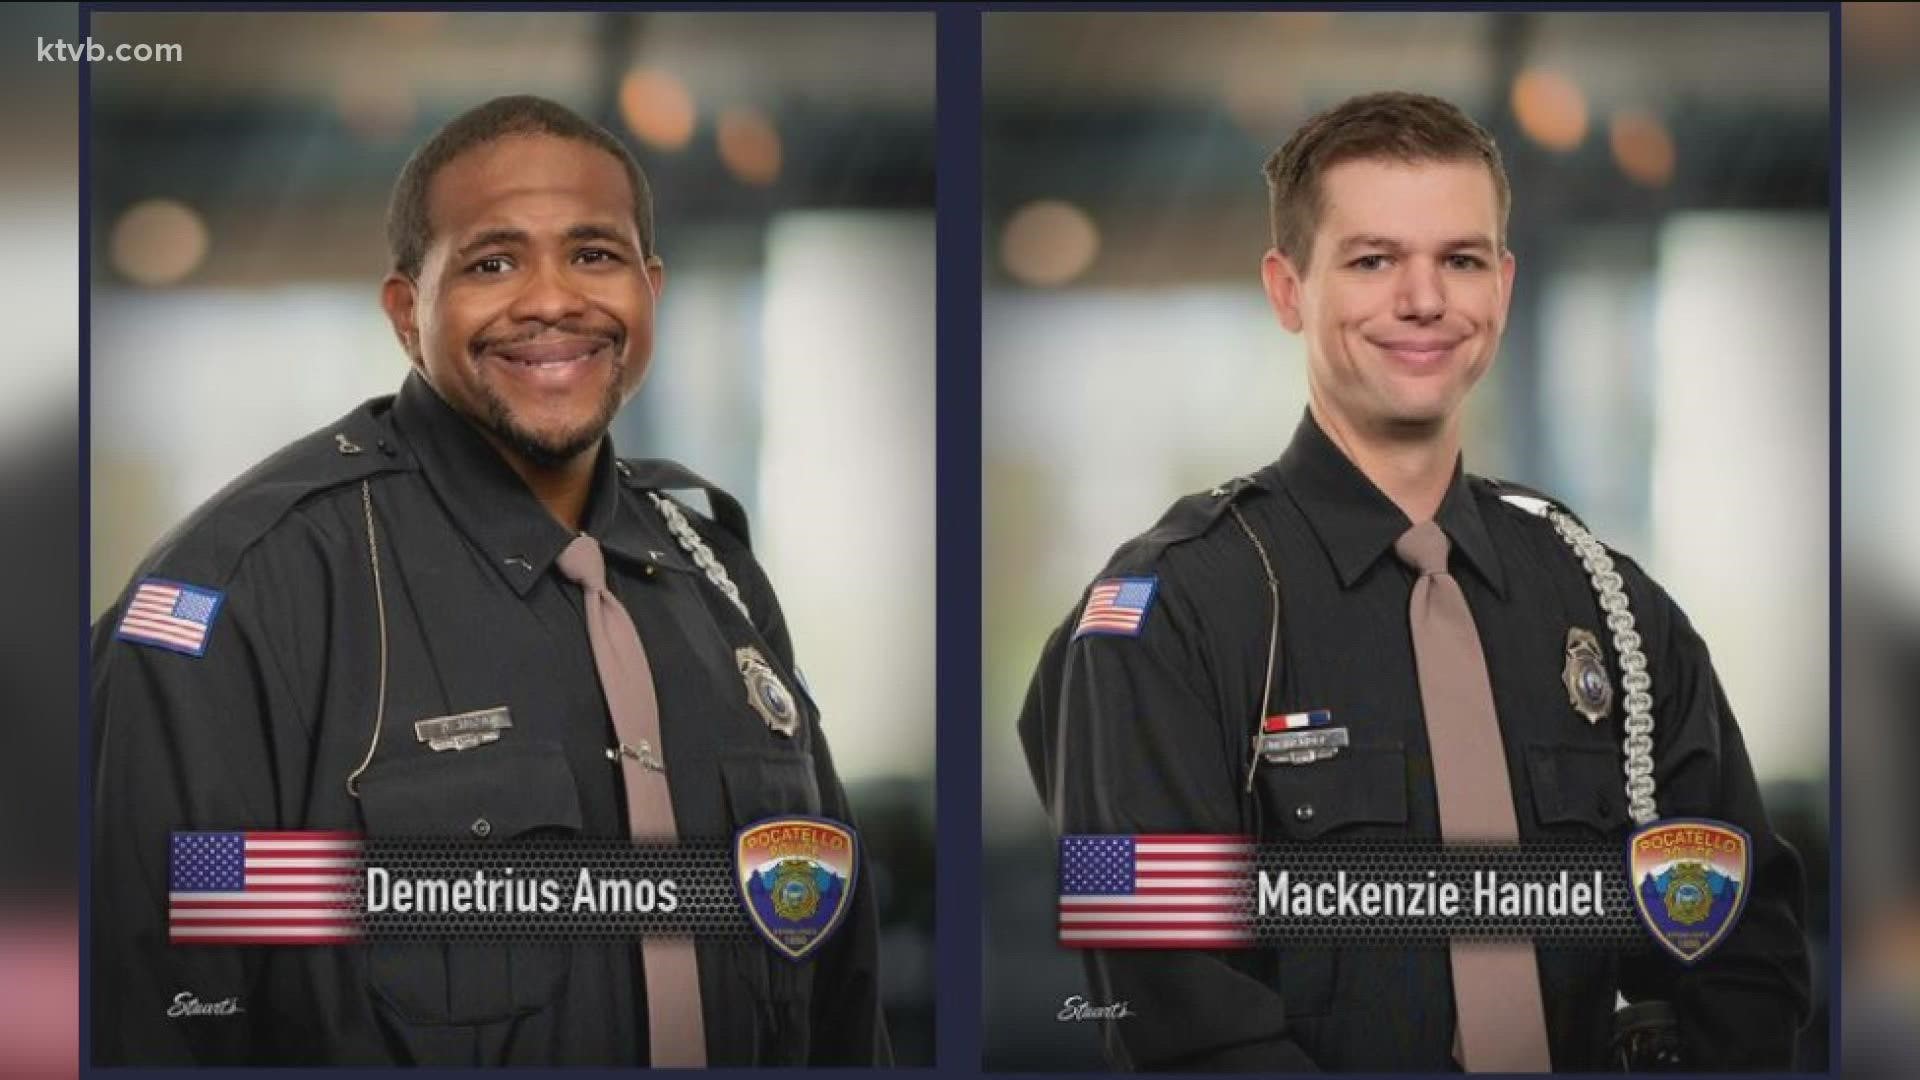 Officers Demetrius Amos and Mackenzie Handel were wounded after responding to a home blocks from the police station for a report of a disturbance.